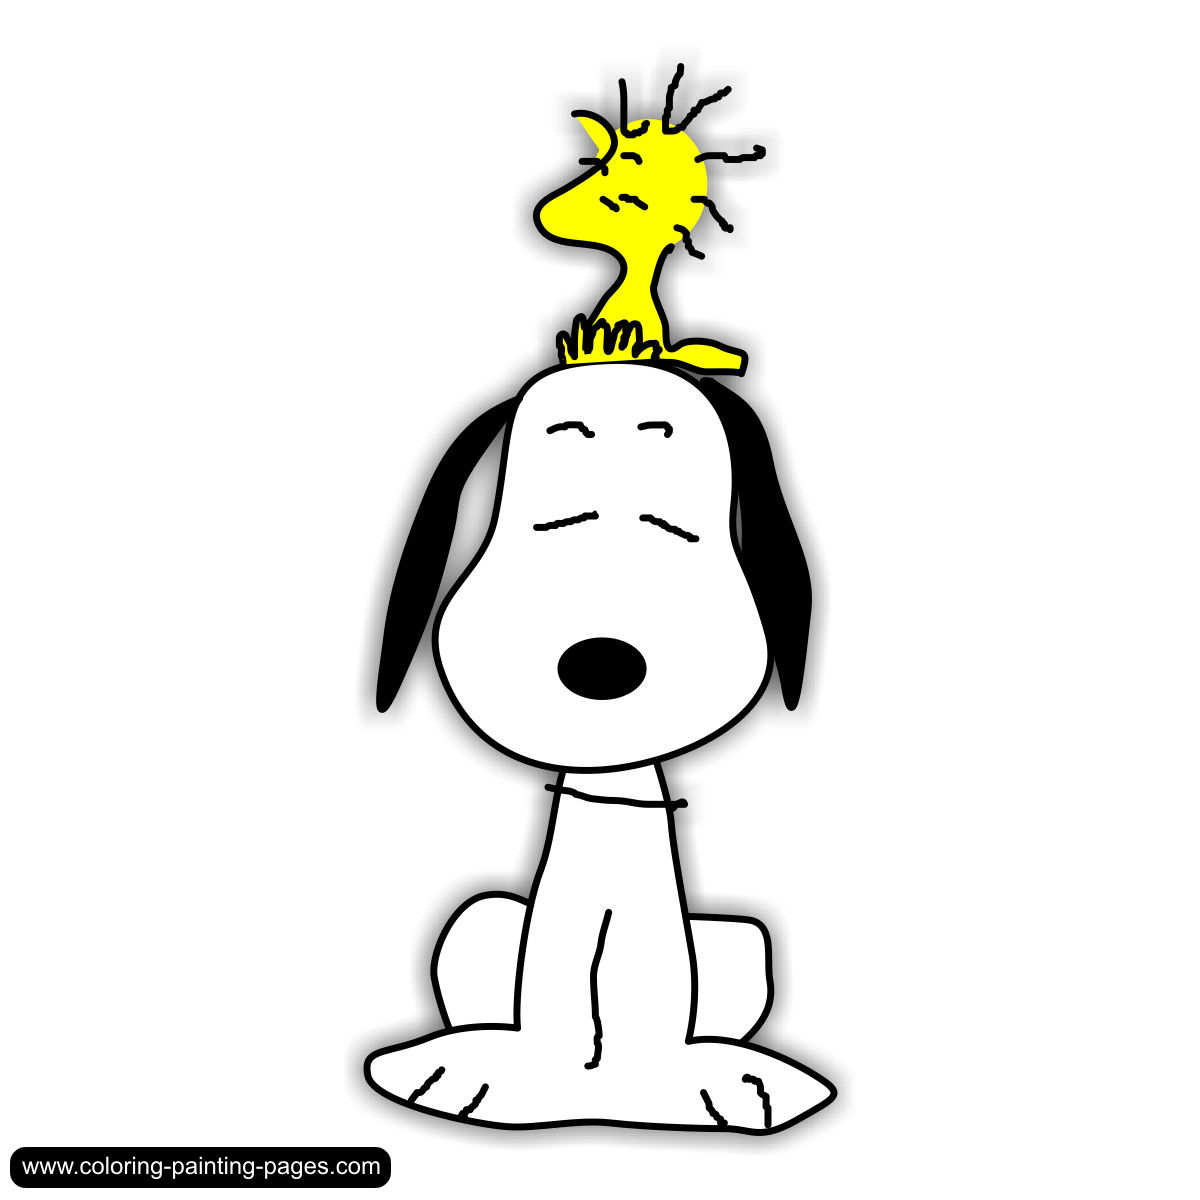 Free Snoopy Cliparts Free, Download Free Clip Art, Free Clip.